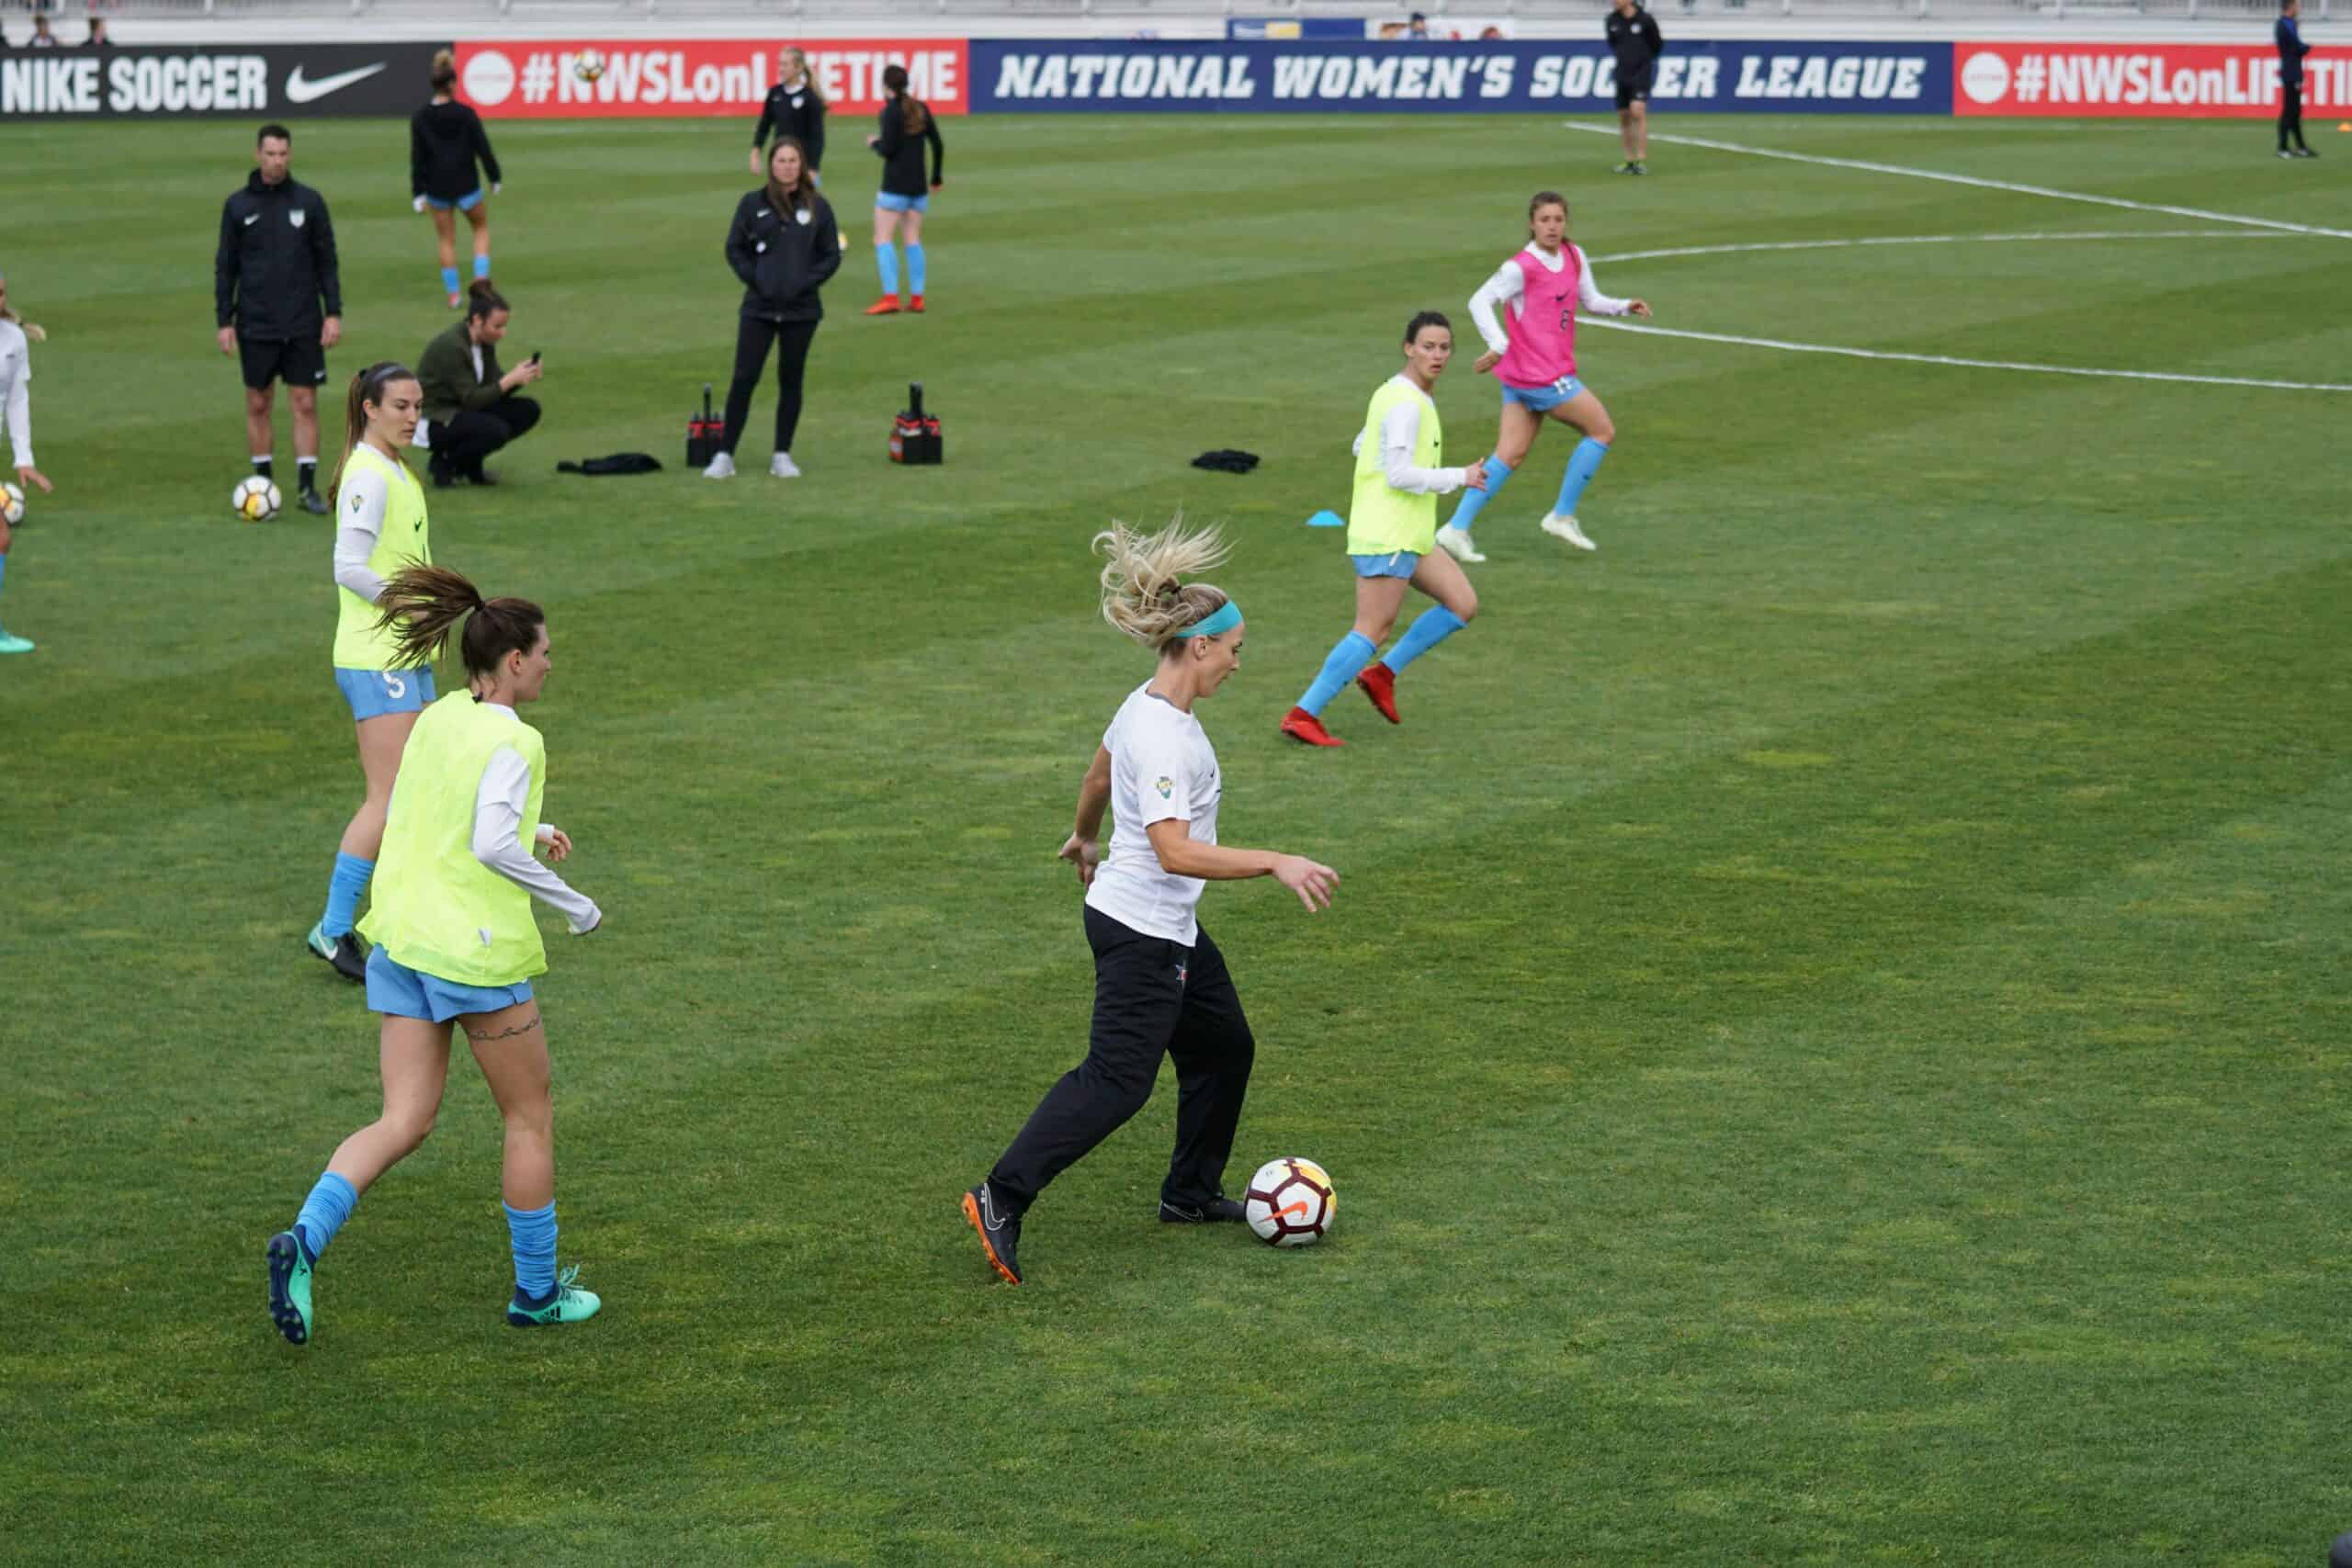 NWSL players practicing